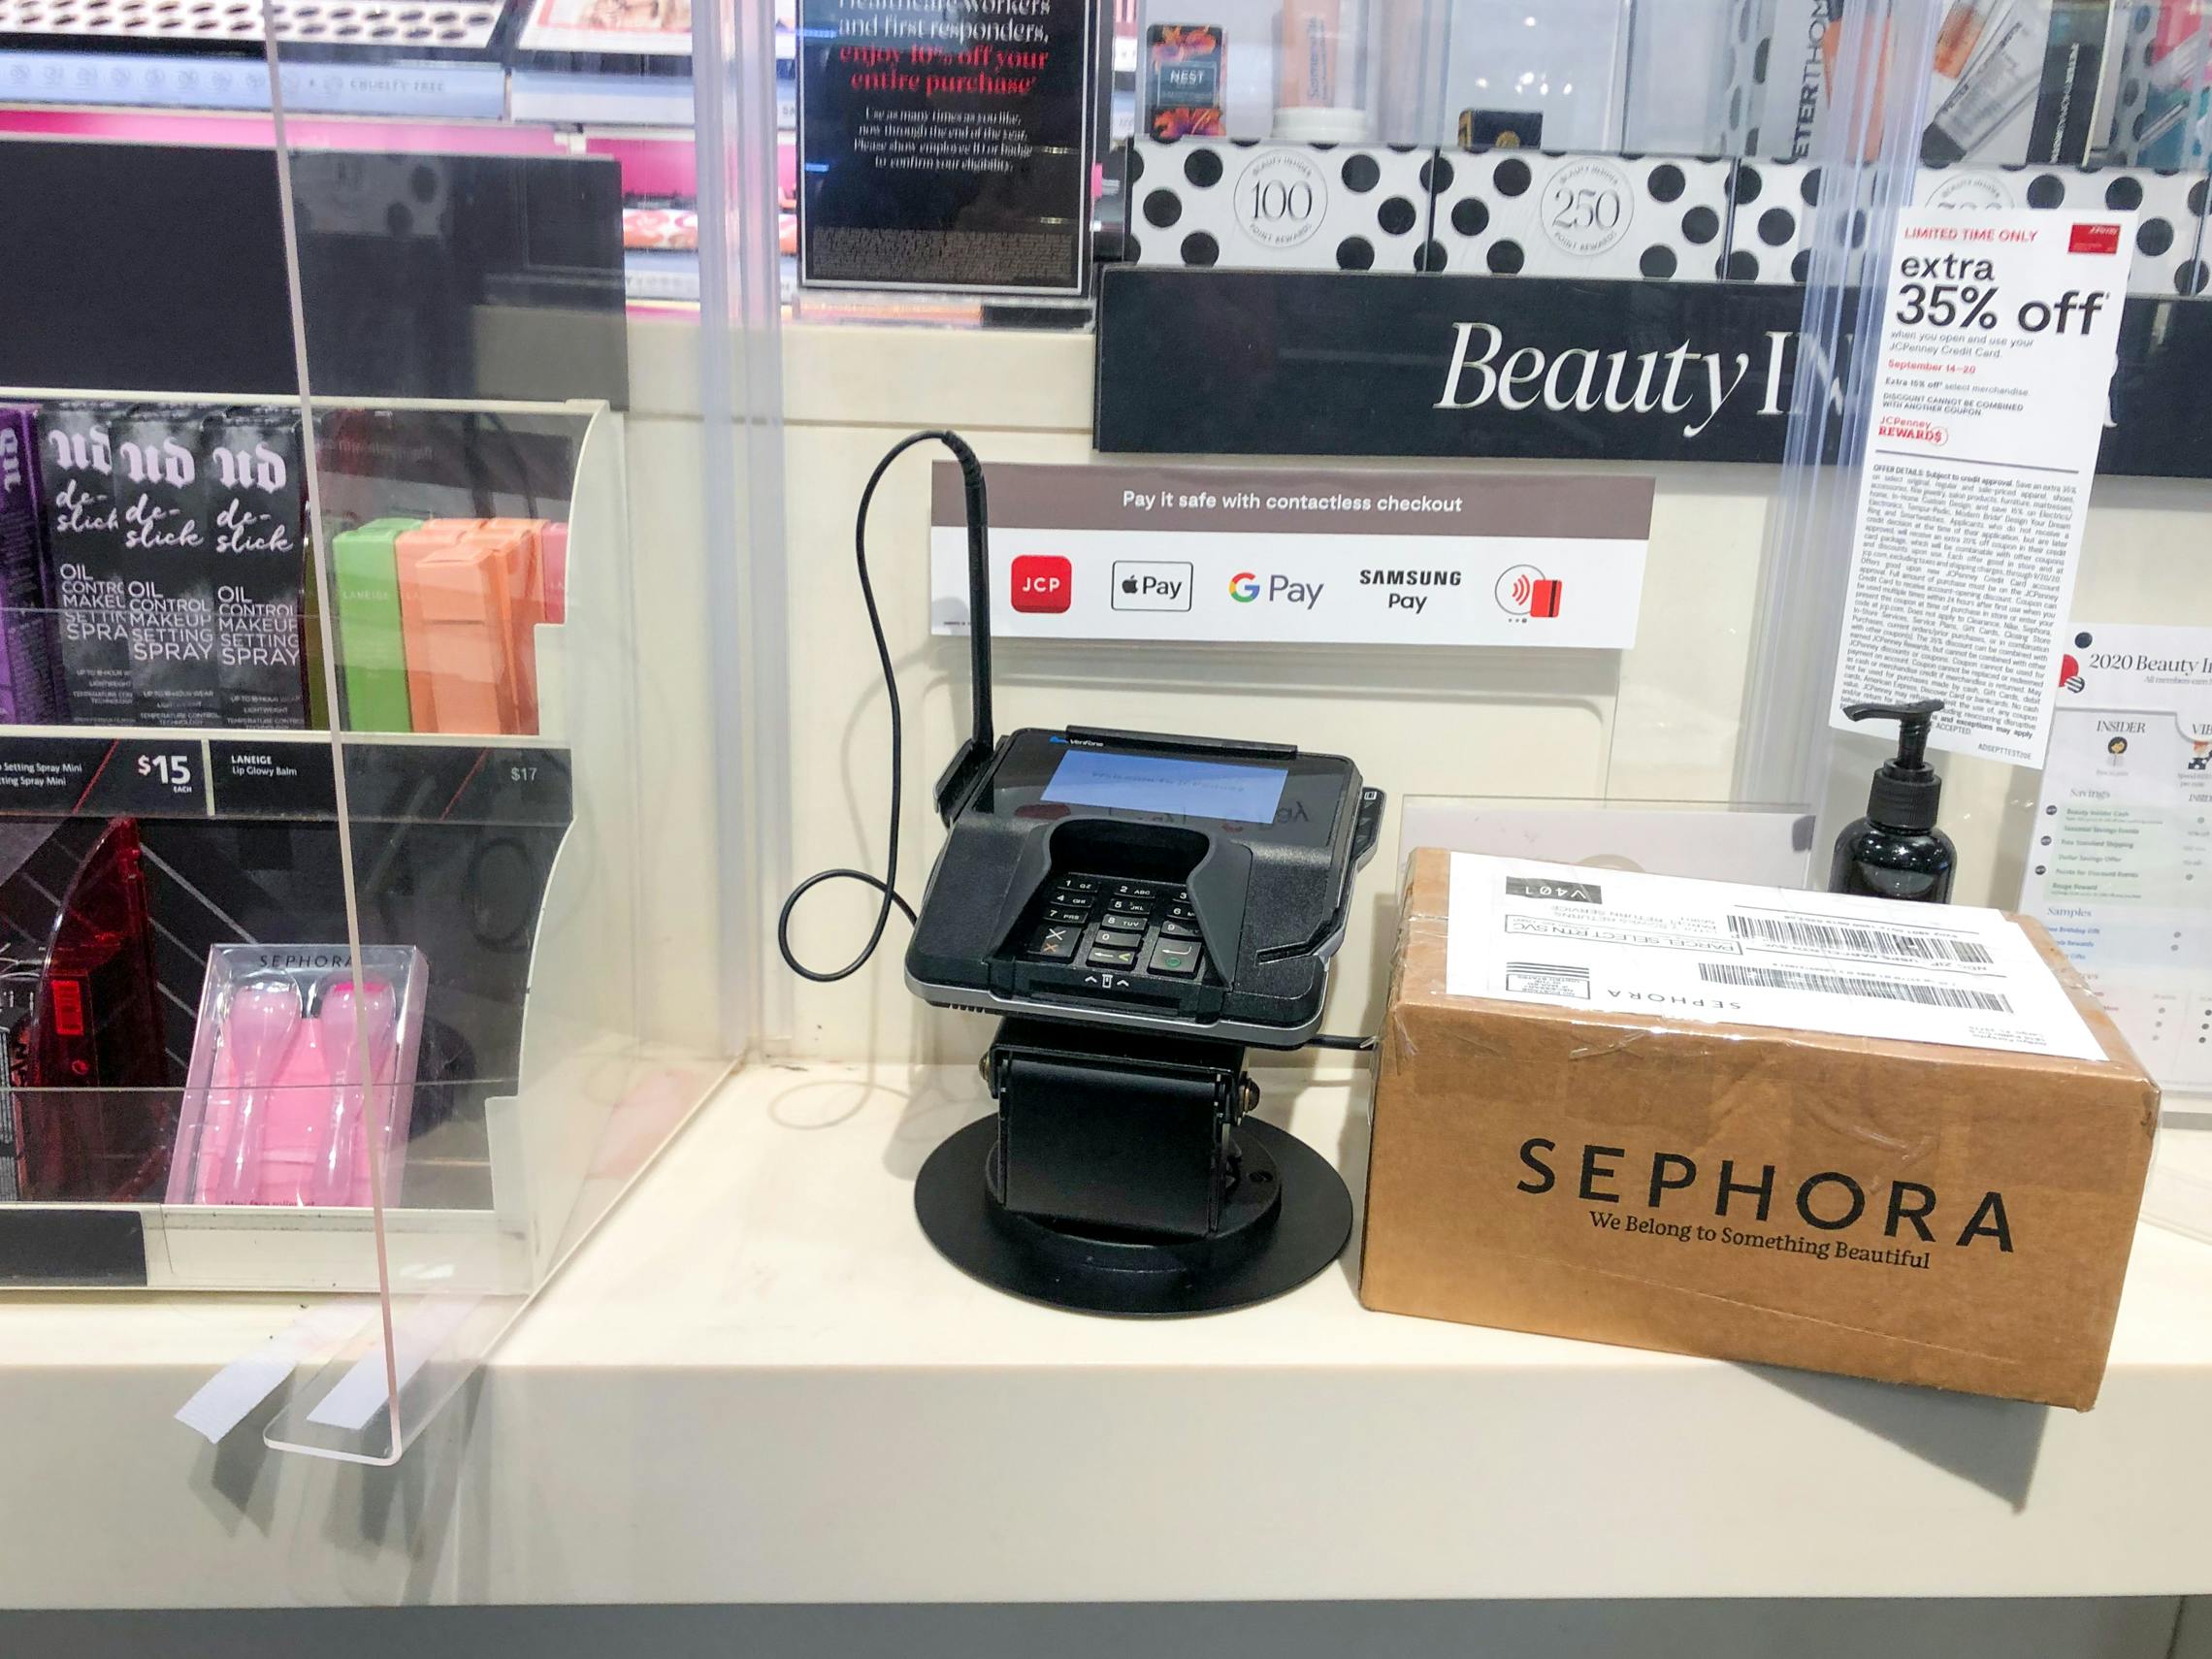 Return shipping box sitting on the counter near a register at Sephora